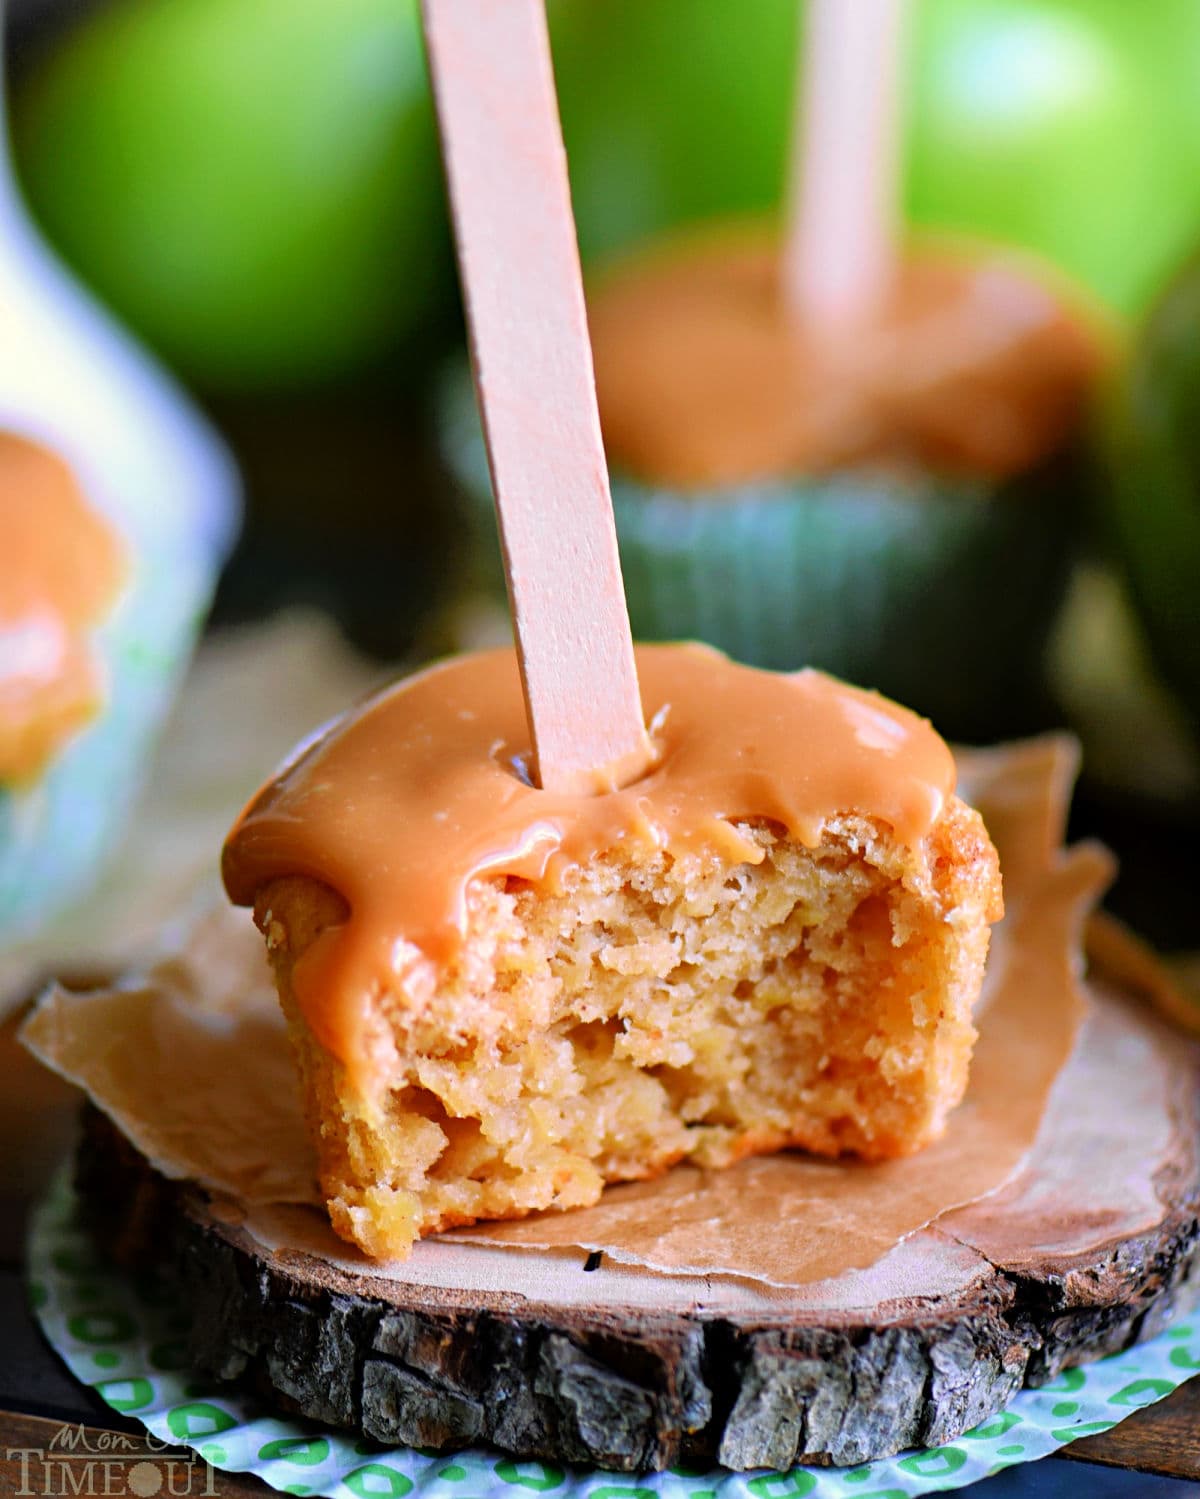 caramel apple cupcake sitting on small wood coaster with a bite taken out of it.